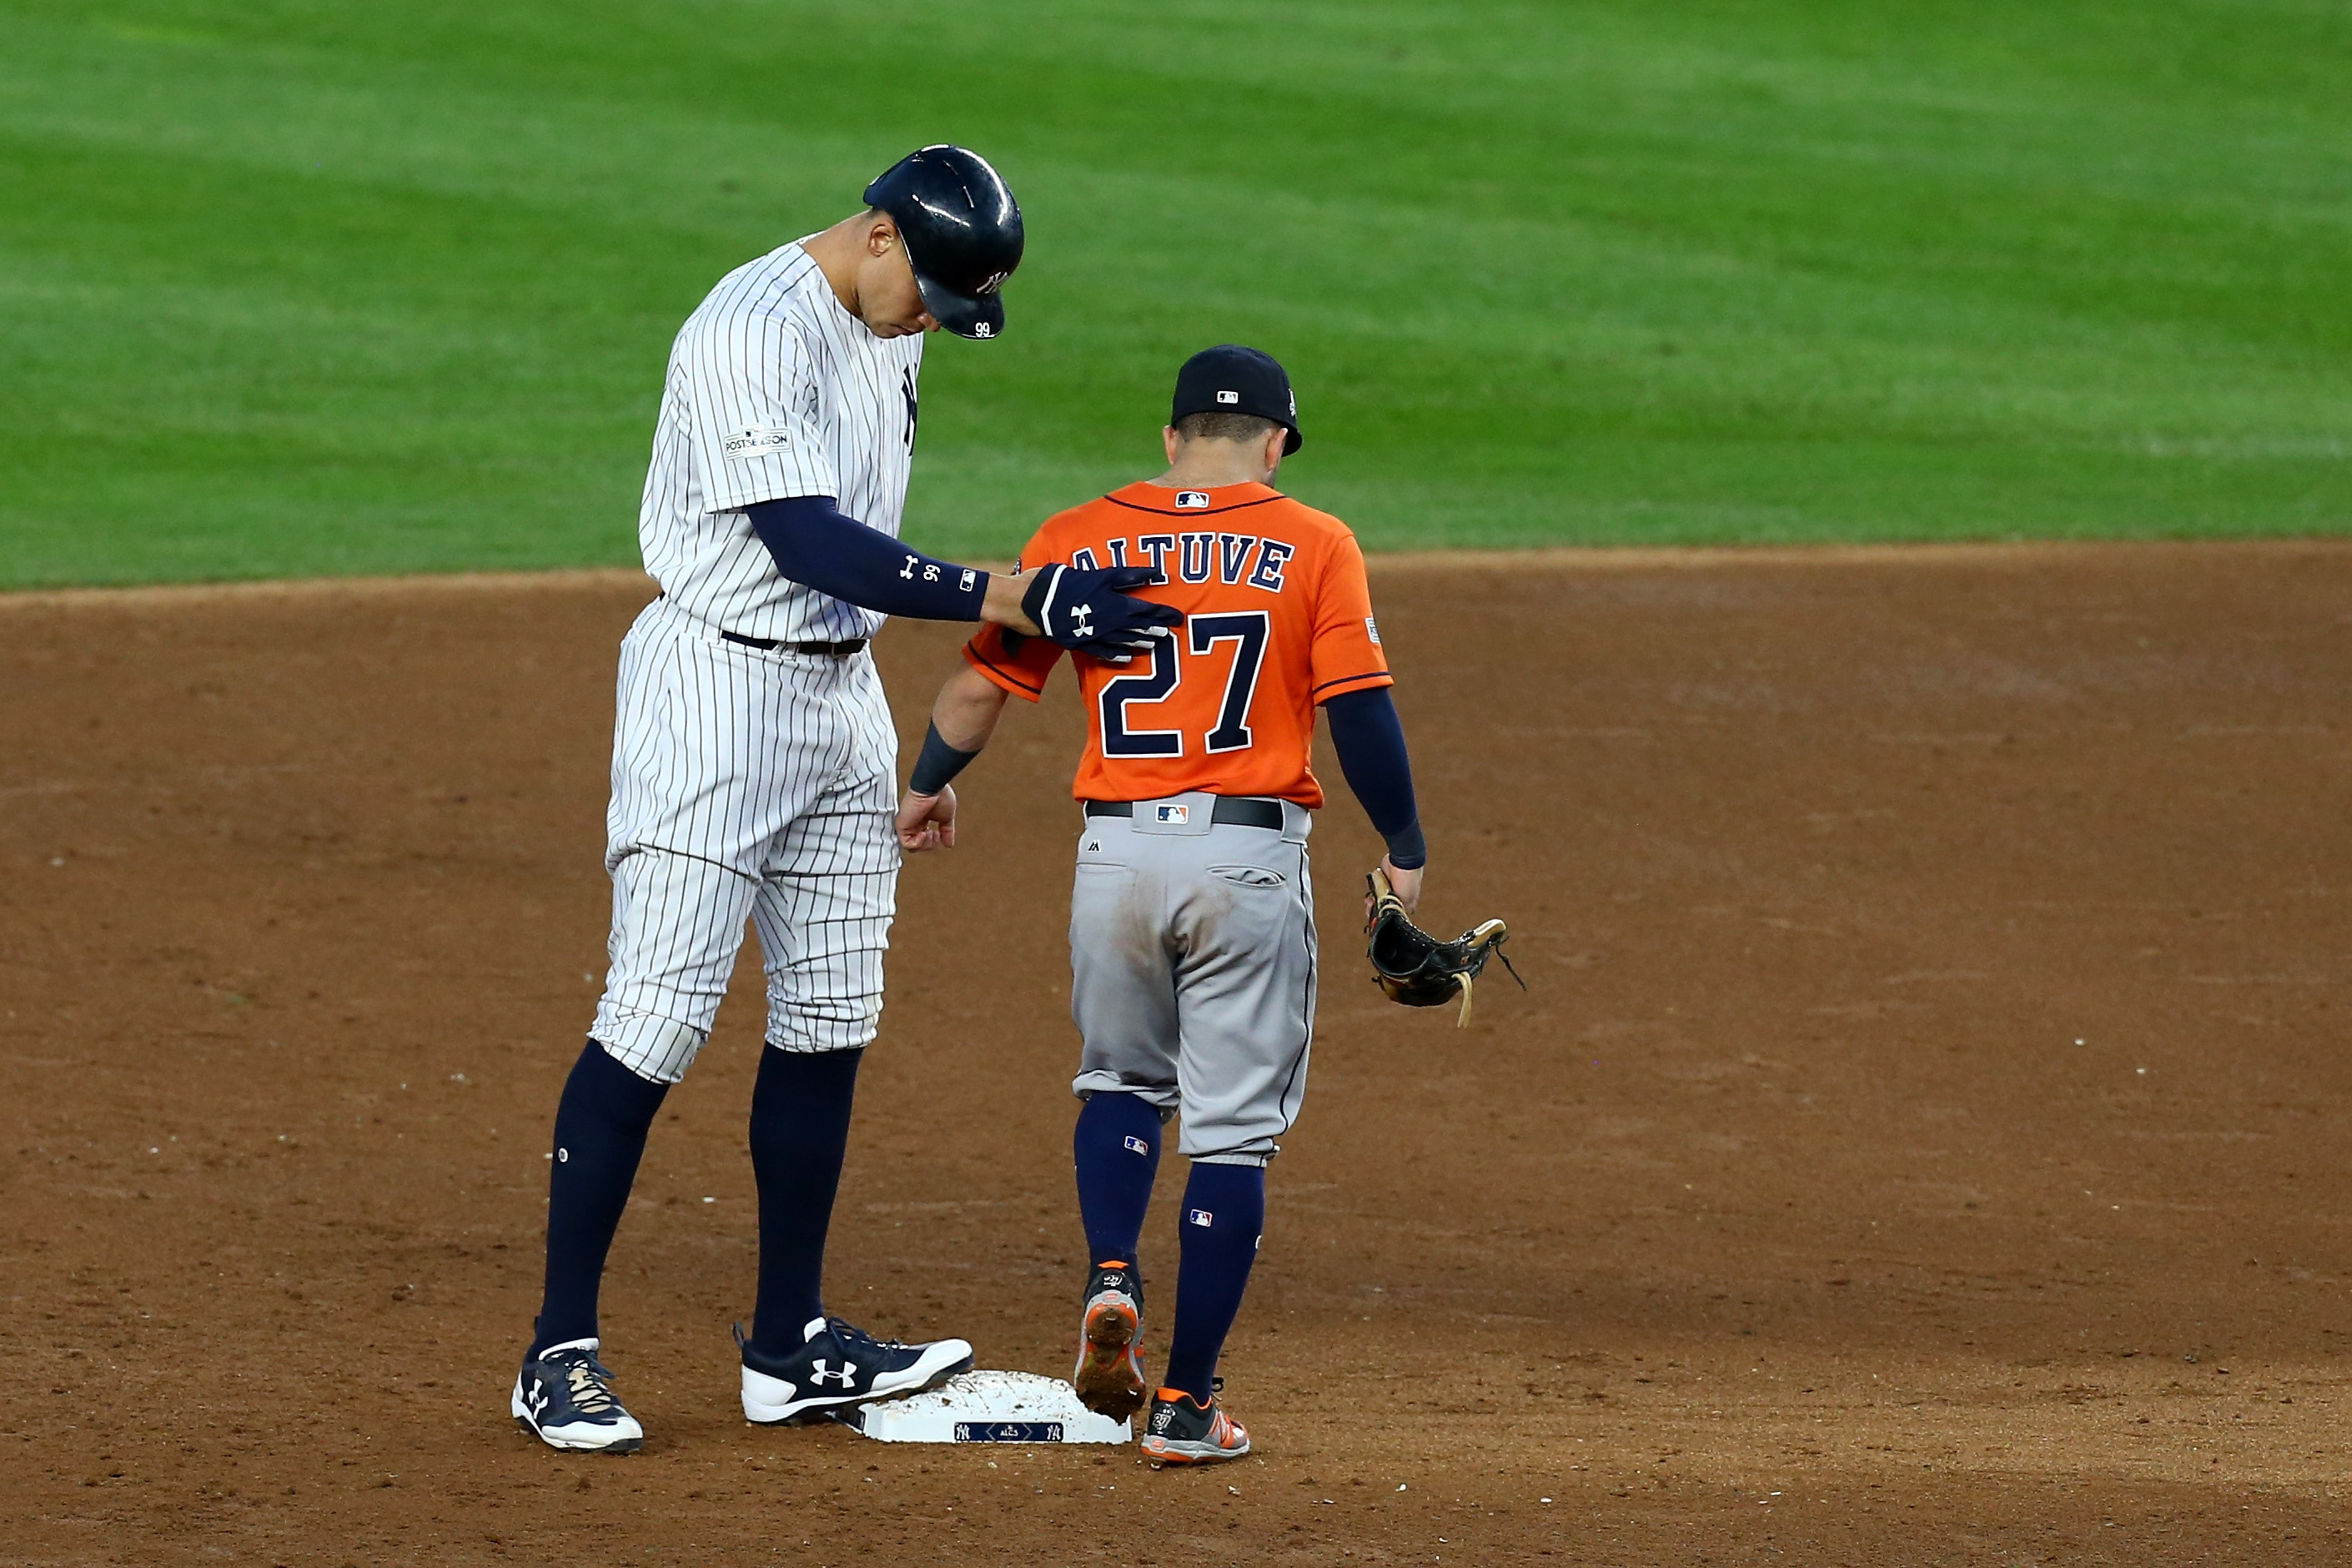 Jose Altuve needed a boost for photo with Aaron Judge